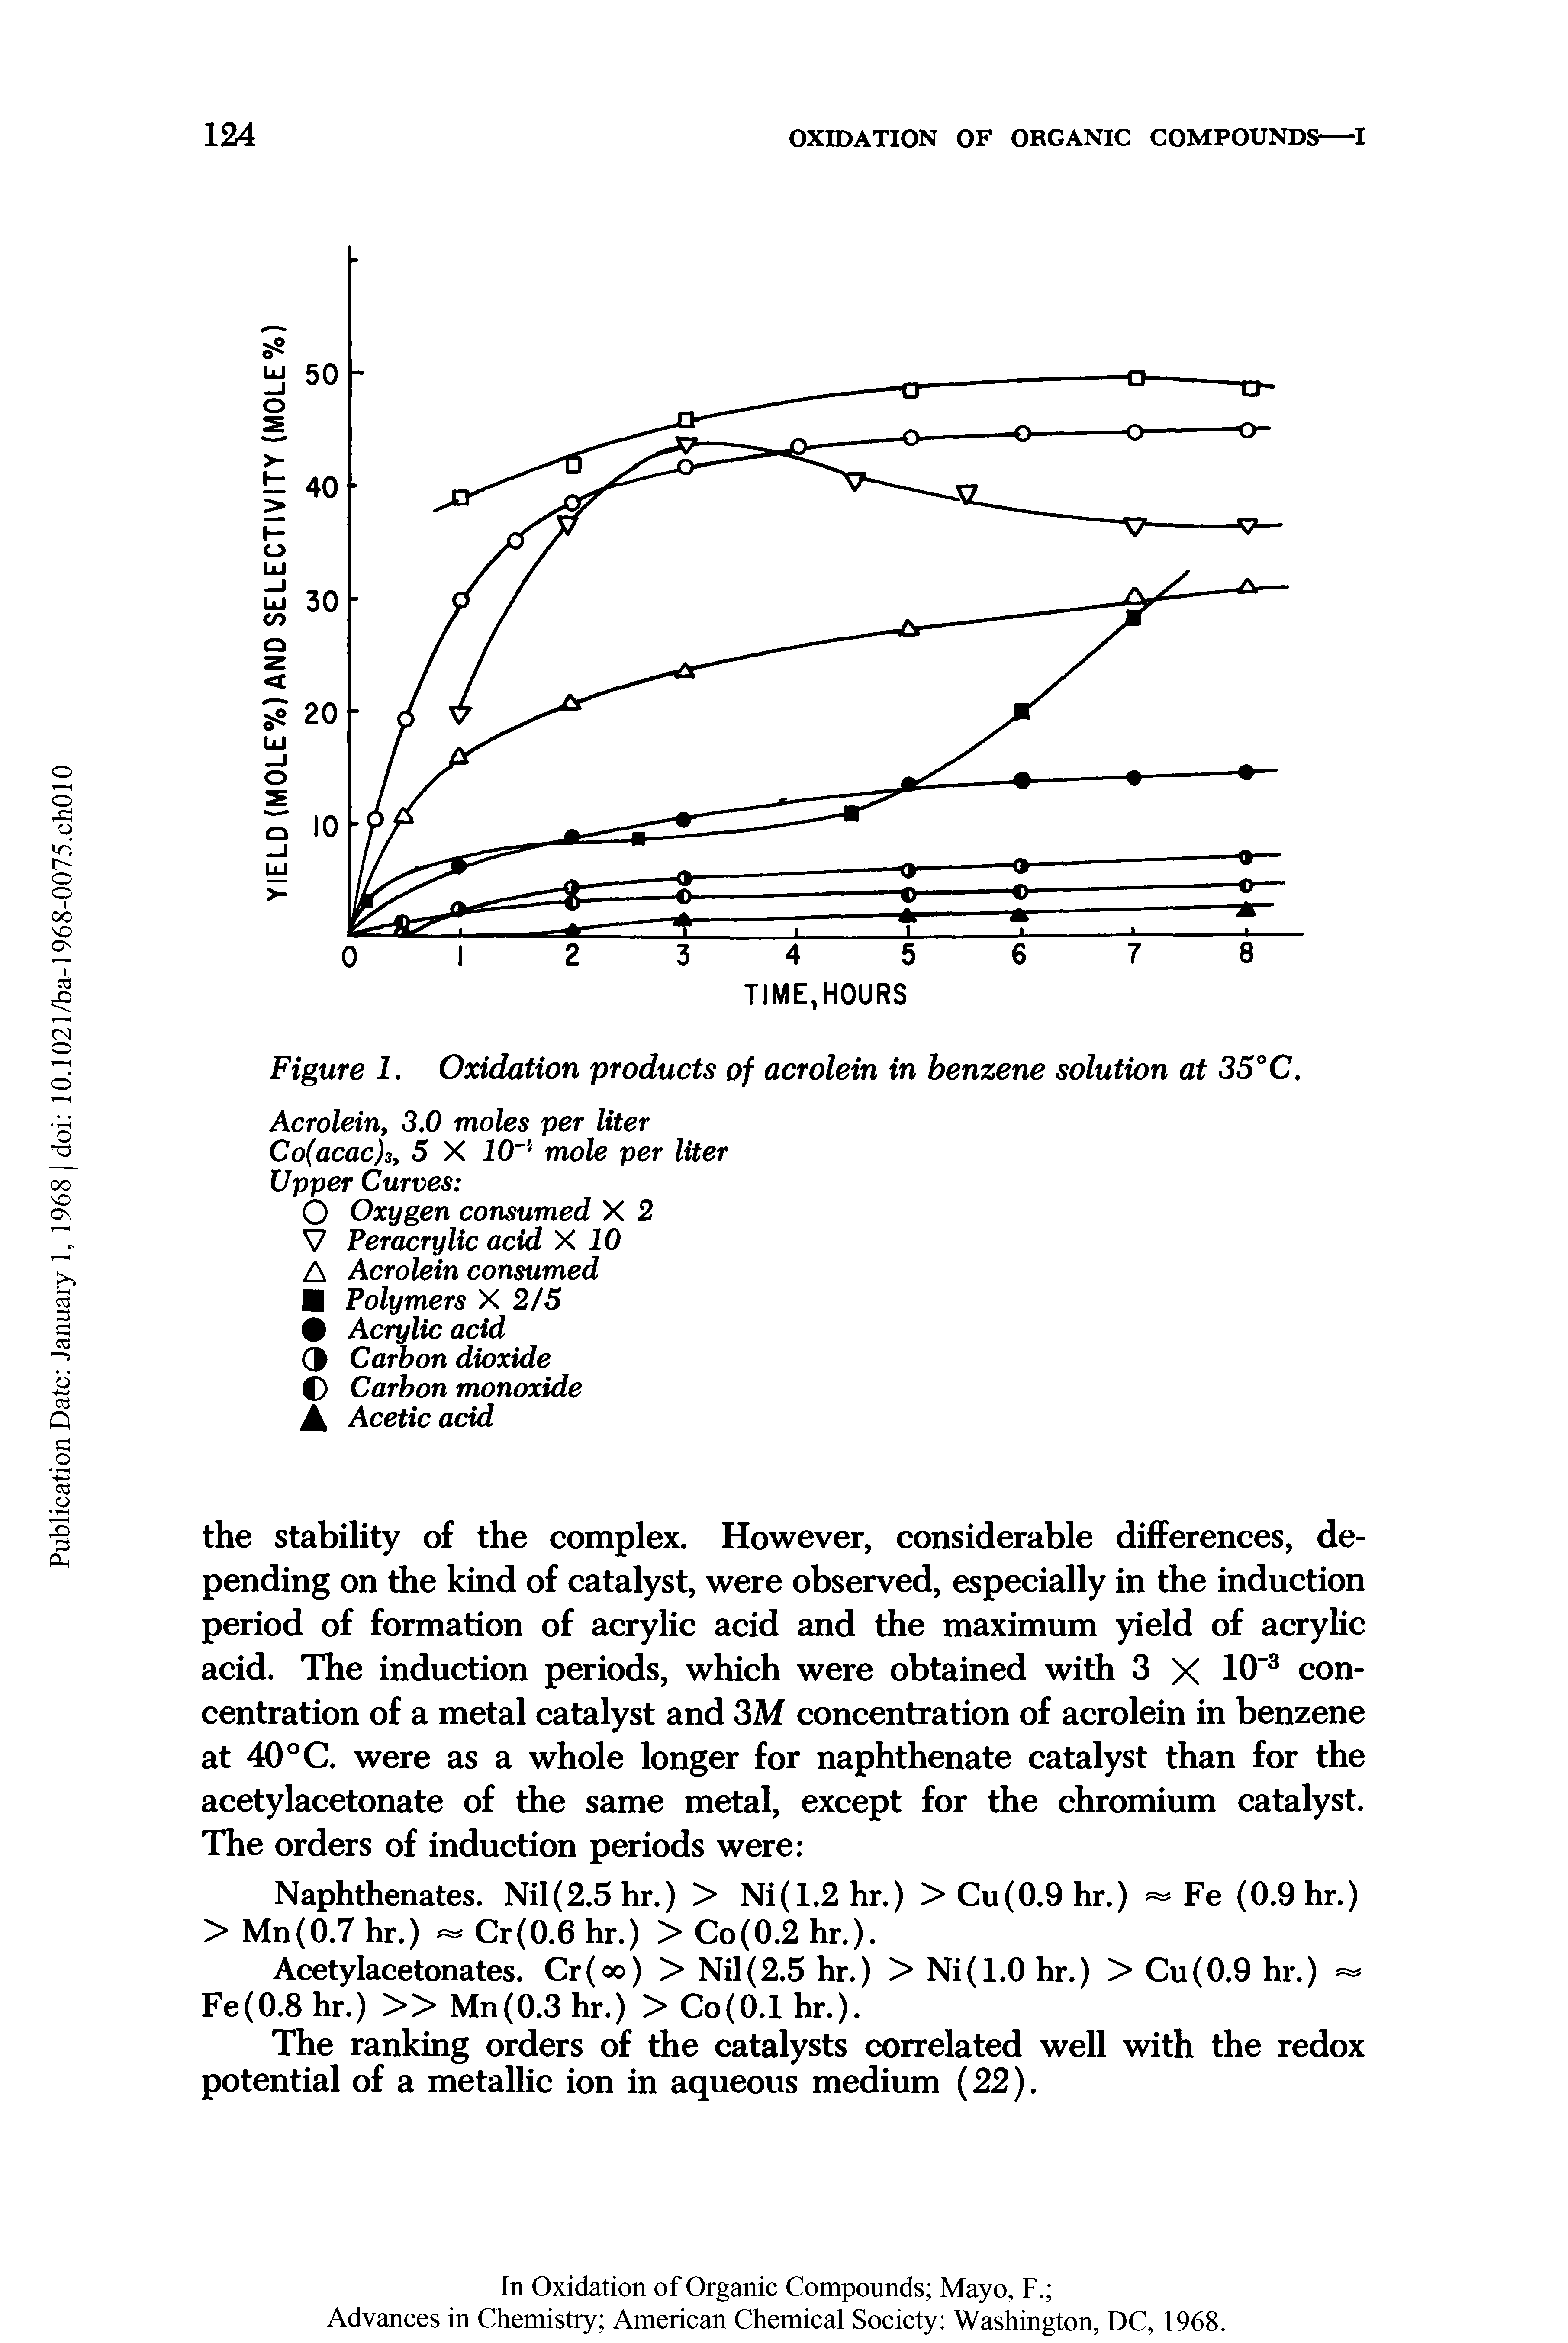 Figure 1. Oxidation products of acrolein in benzene solution at 35°C.